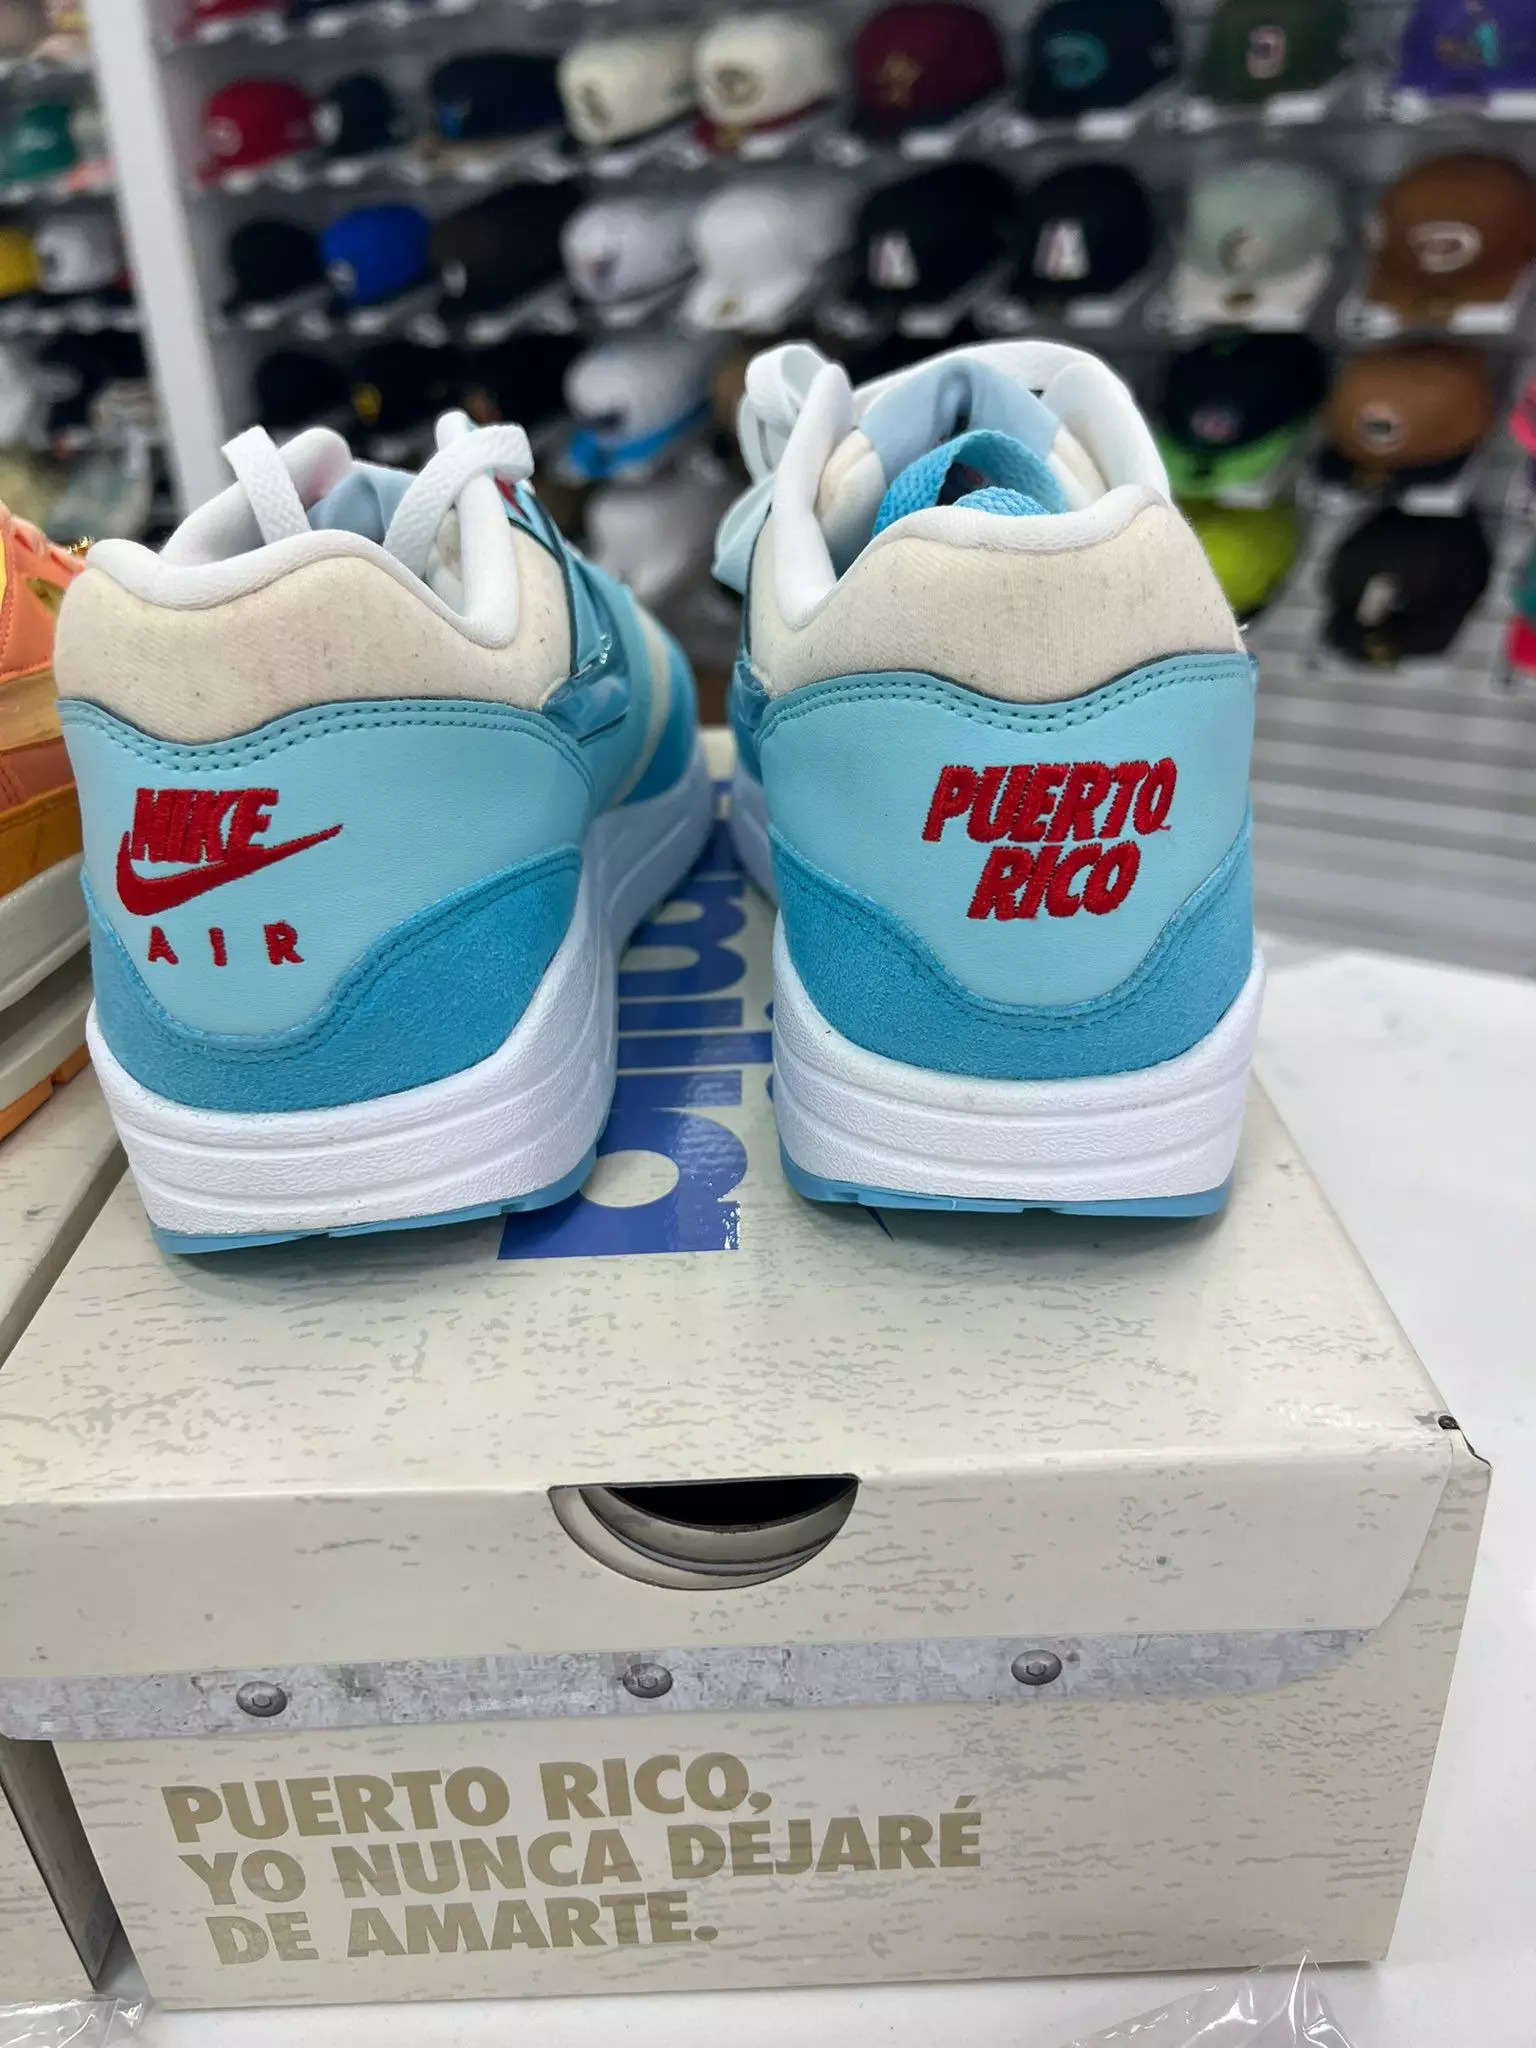 Nike Air Max 1 x Puerto Rican Day "Blue Gale" Shoes: Price, where to get, and key details